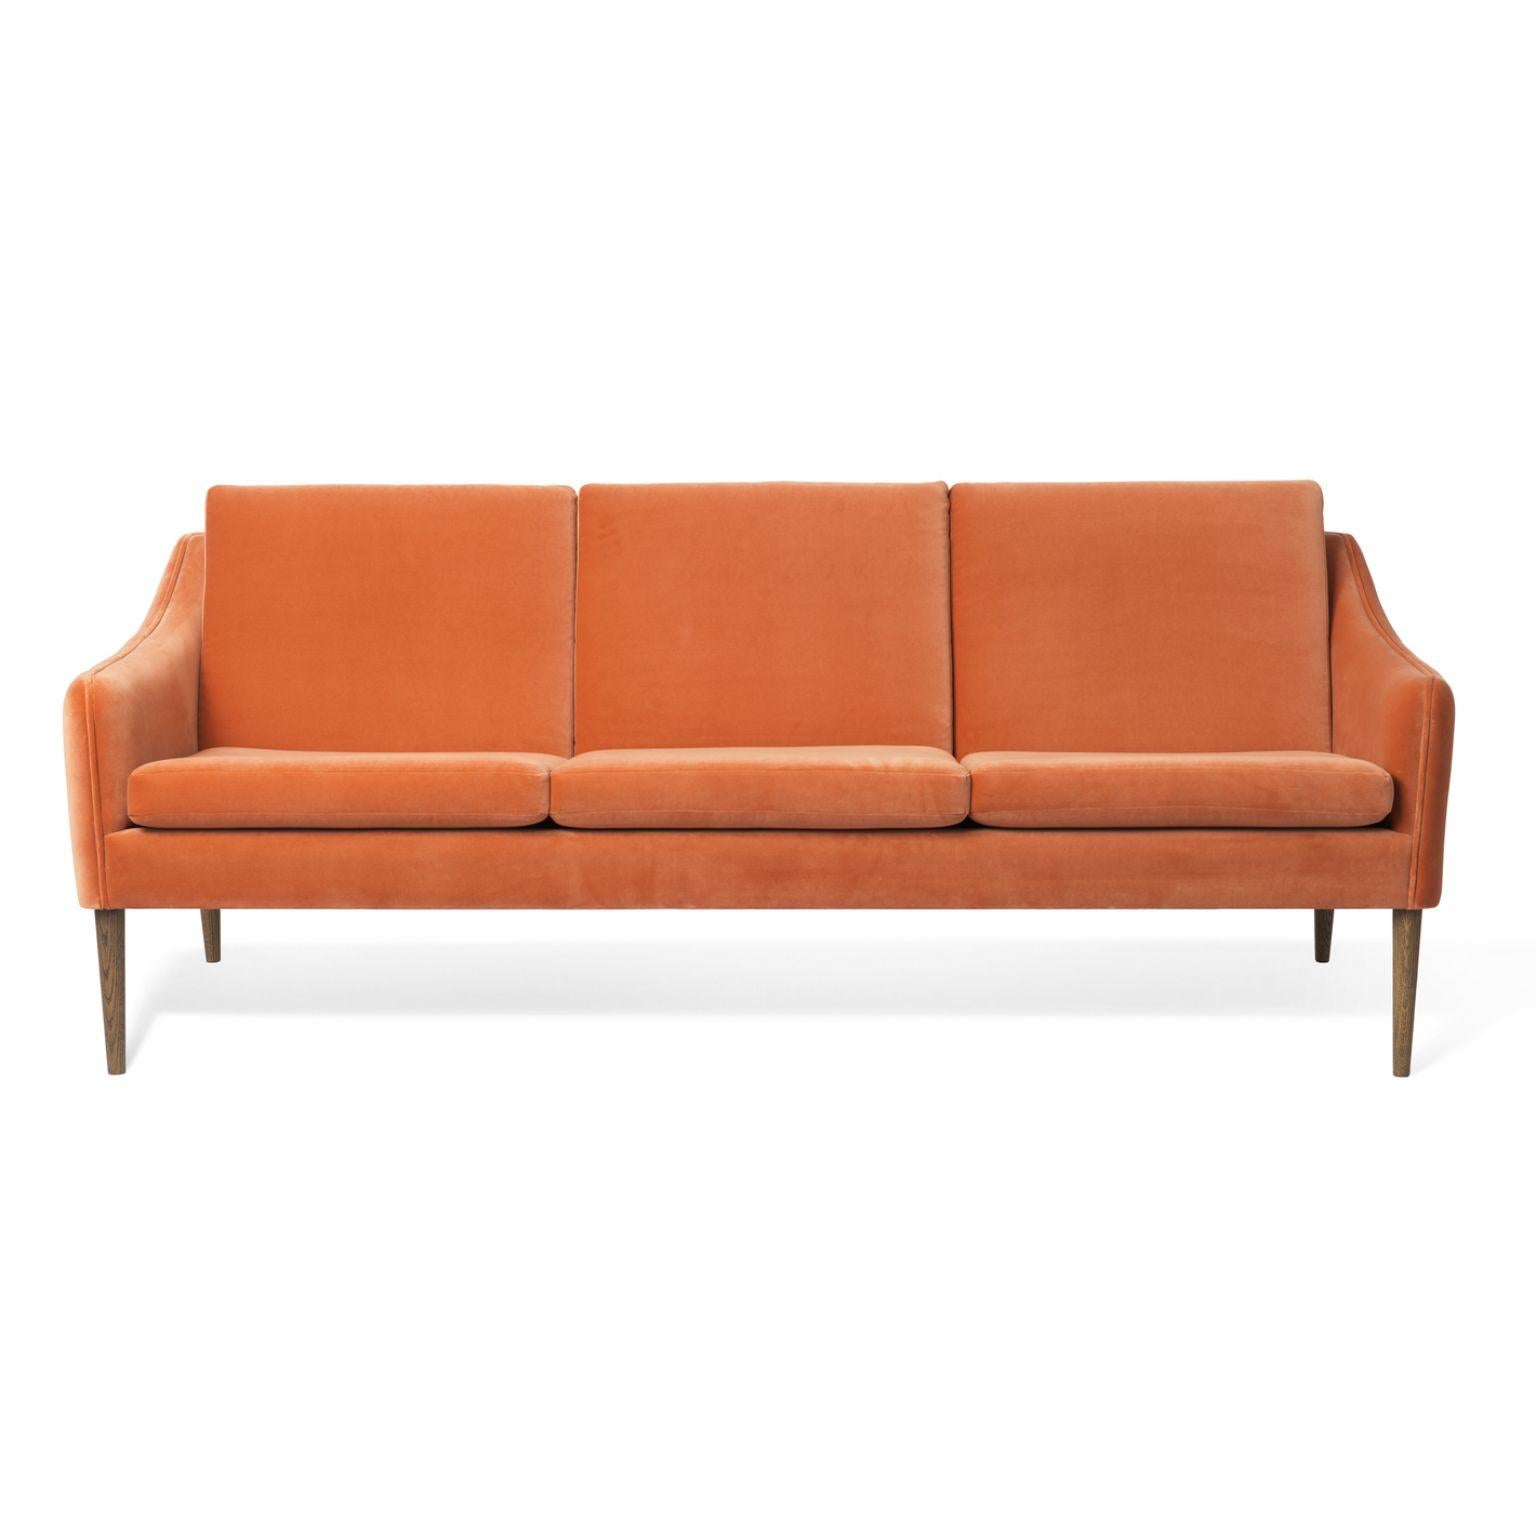 Mr Olsen 3 seater oak rusty rose by Warm Nordic
Dimensions: D201 x W79 x H 78/46 cm
Material: Textile upholstery, Foam, Spring system, Solid oiled oak legs, Solid smoked oak legs
Weight: 50 kg
Also available in different colours and finishes.